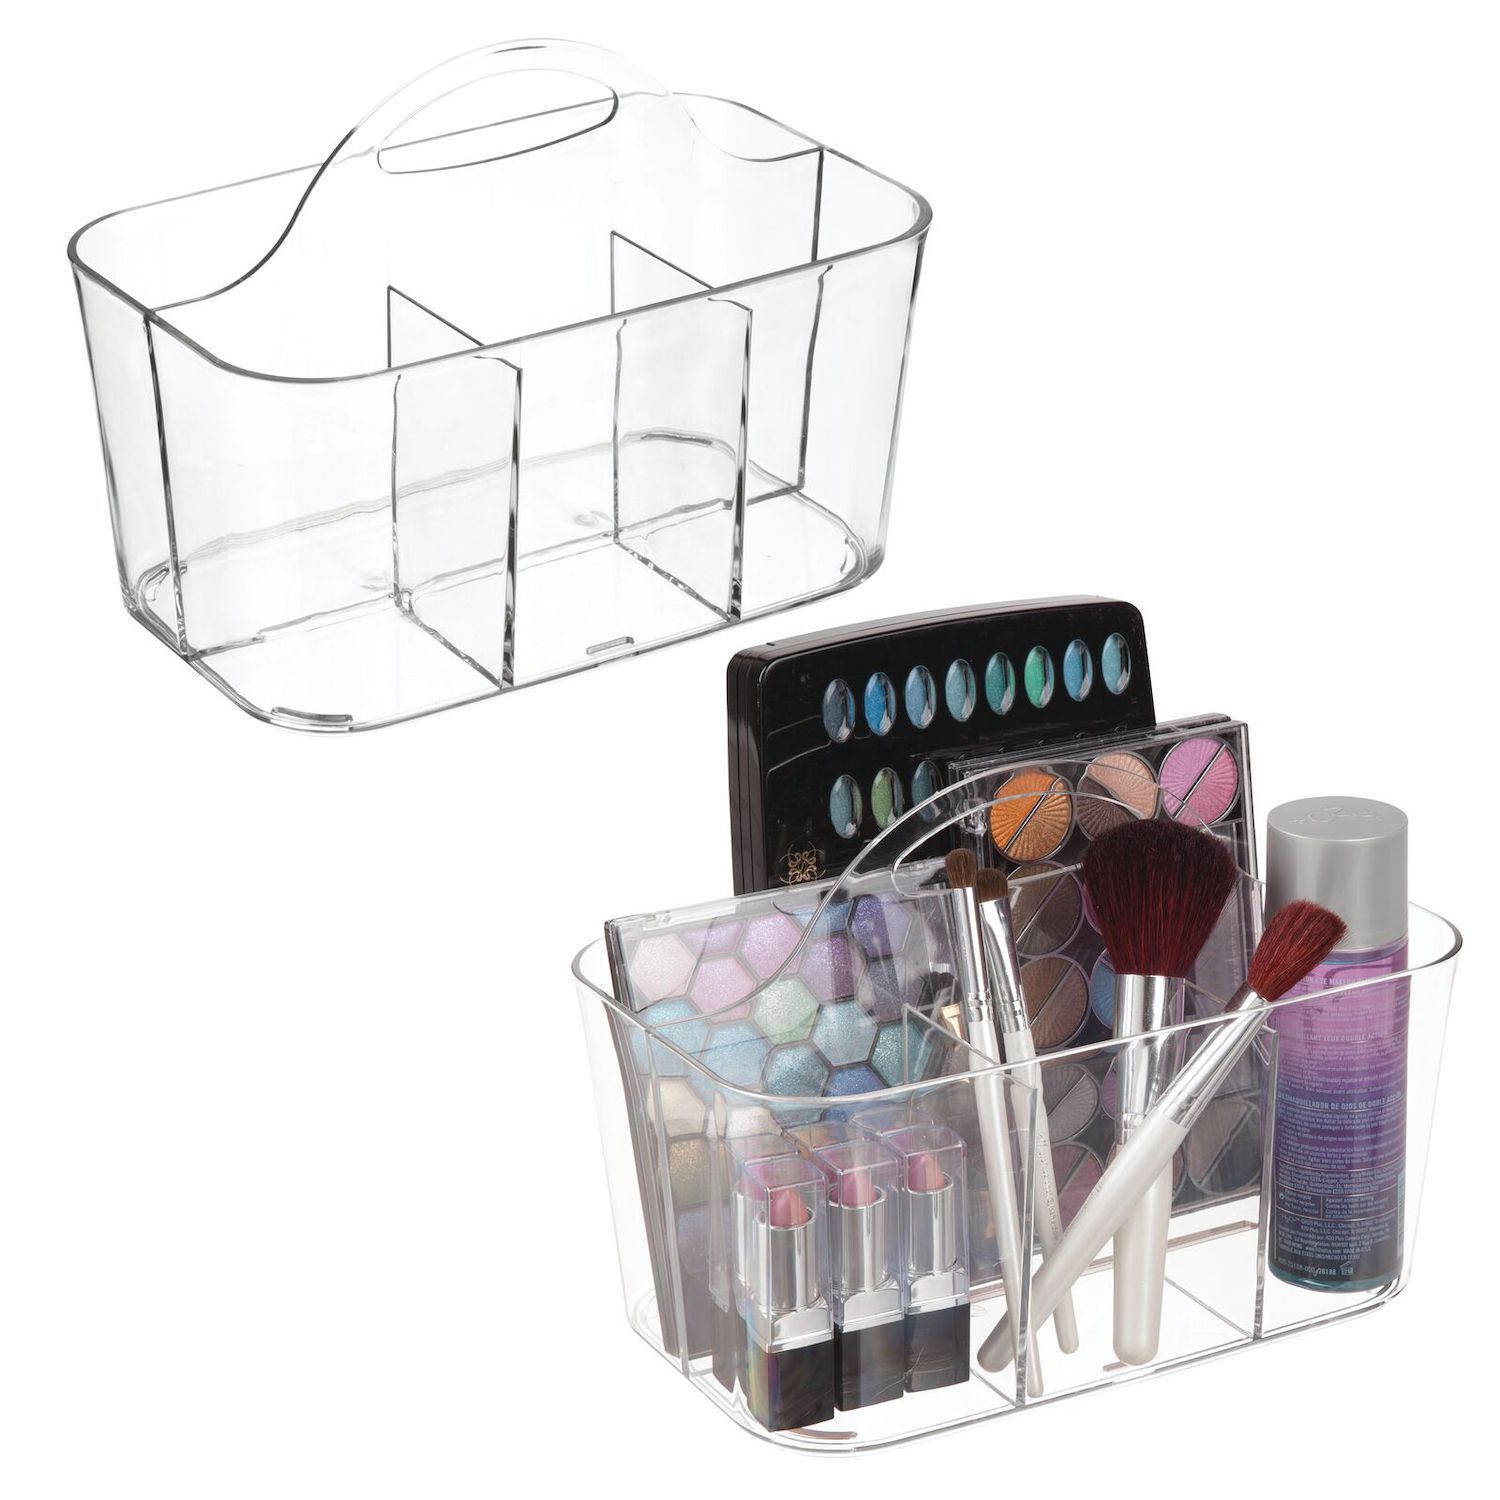 mDesign Small Plastic Caddy Tote for Desktop Office Supplies - Clear